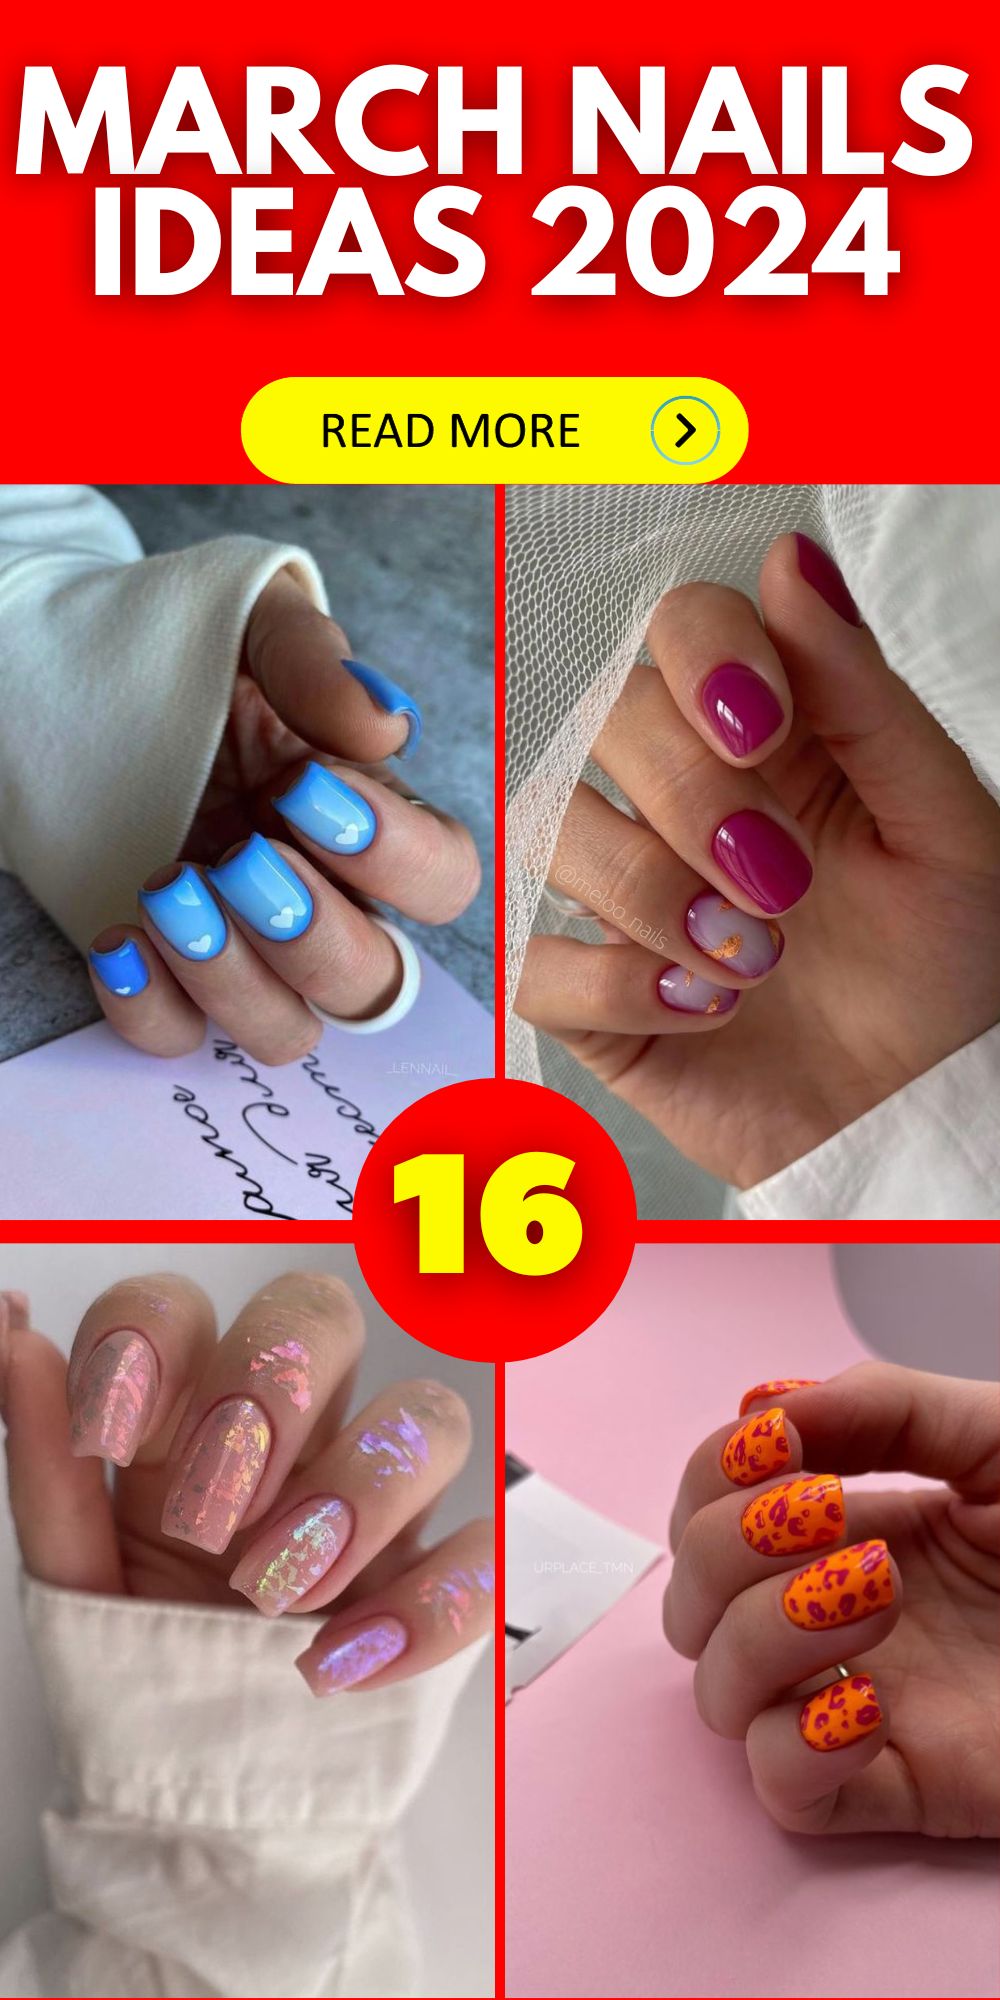 March Nails Ideas 2024: Embrace New Spring Trends with Cute, Simple Styles